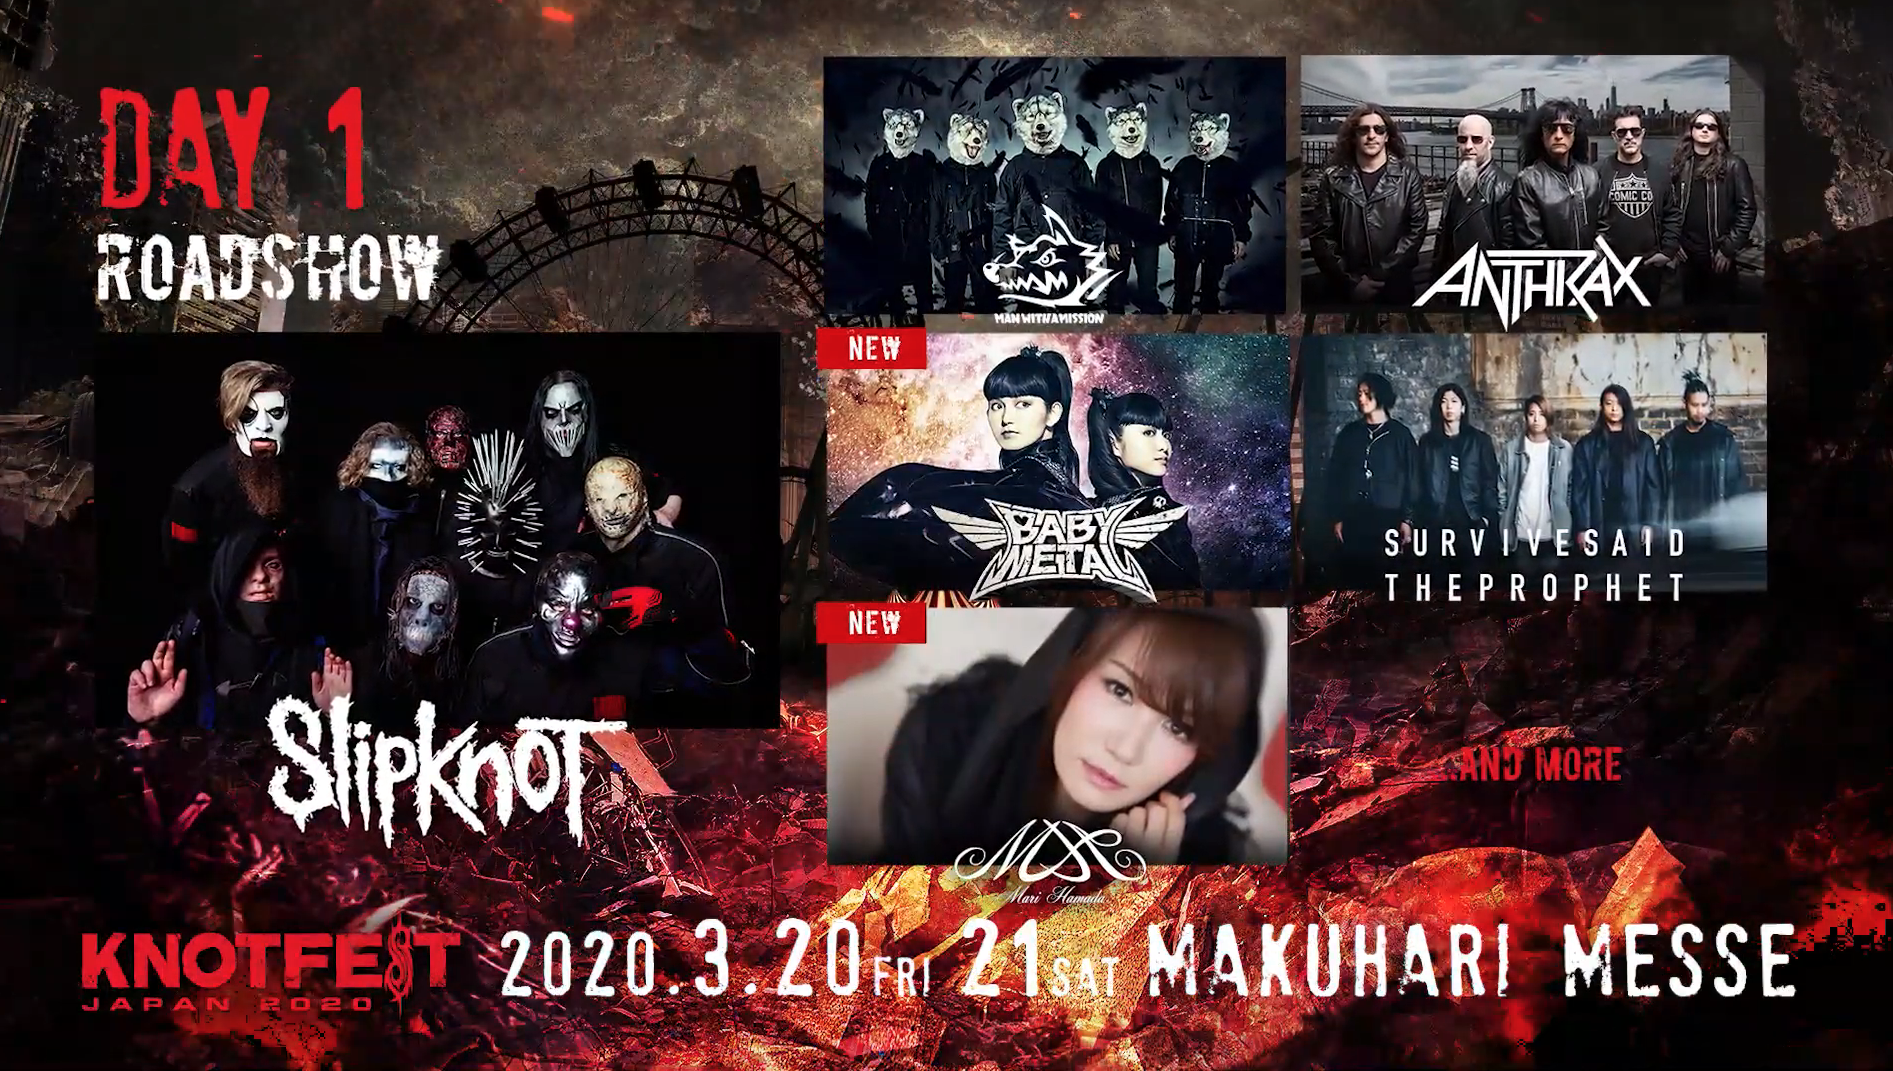 BABYMETAL Will Play At Knotfest Japan On March 20th, 2020